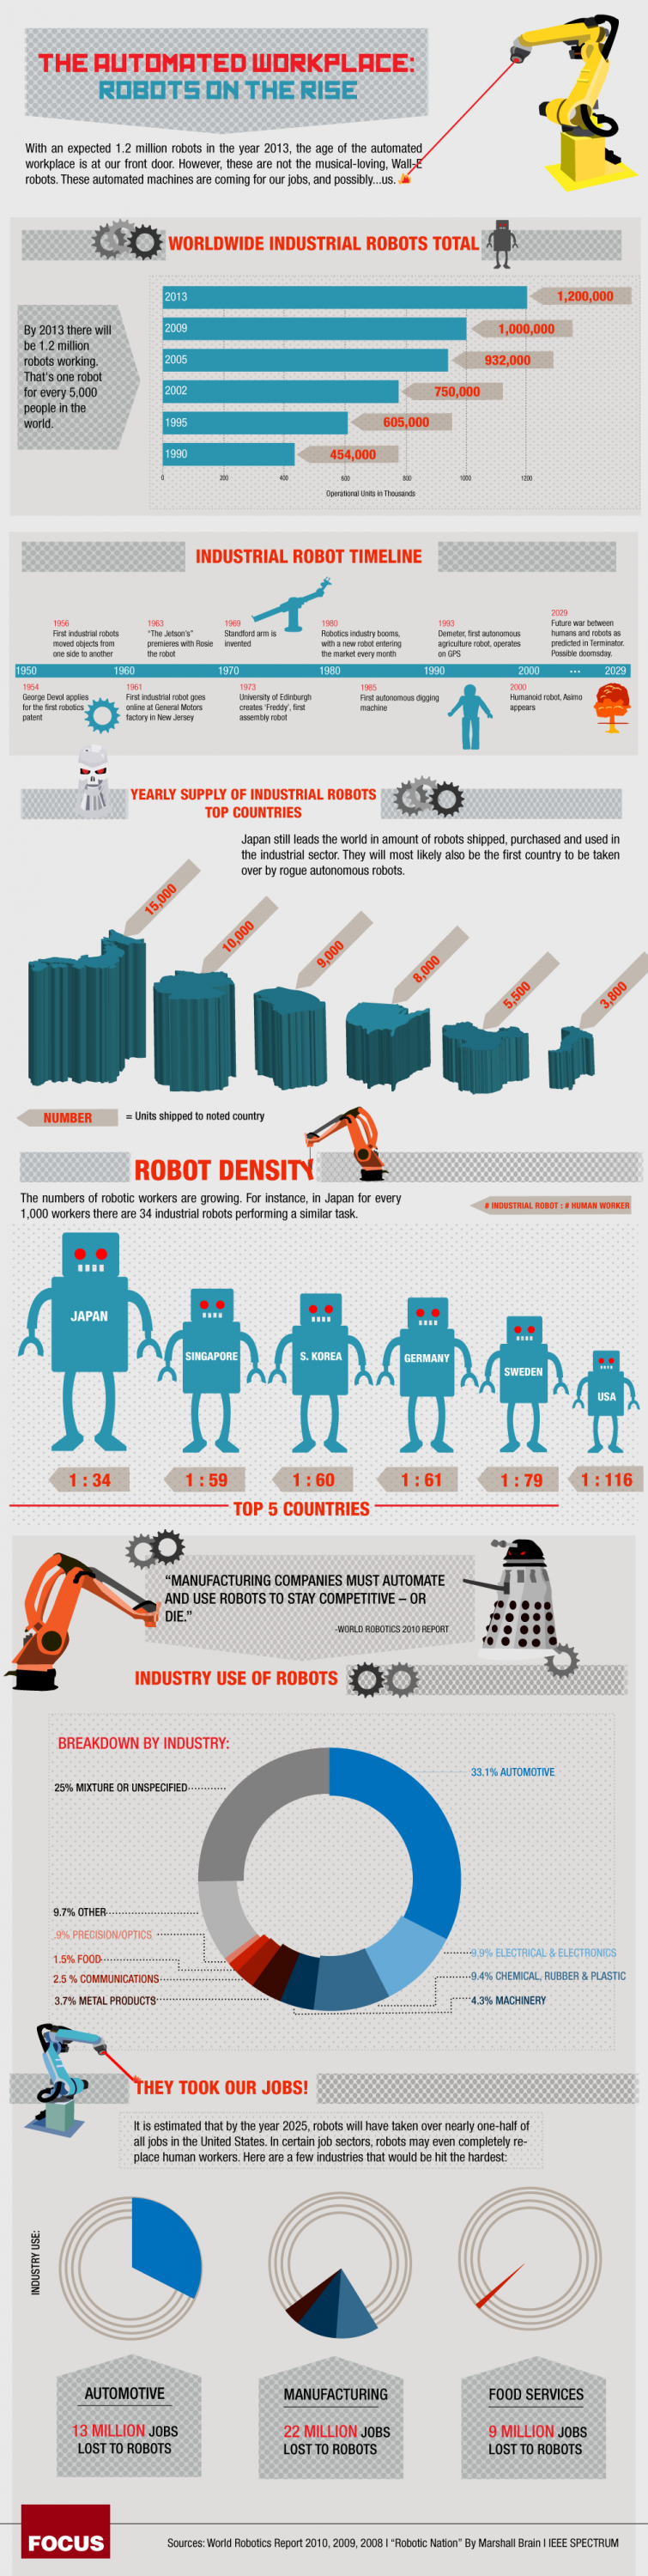 The Automated Workplace: Robots On The Rise [Infographic]